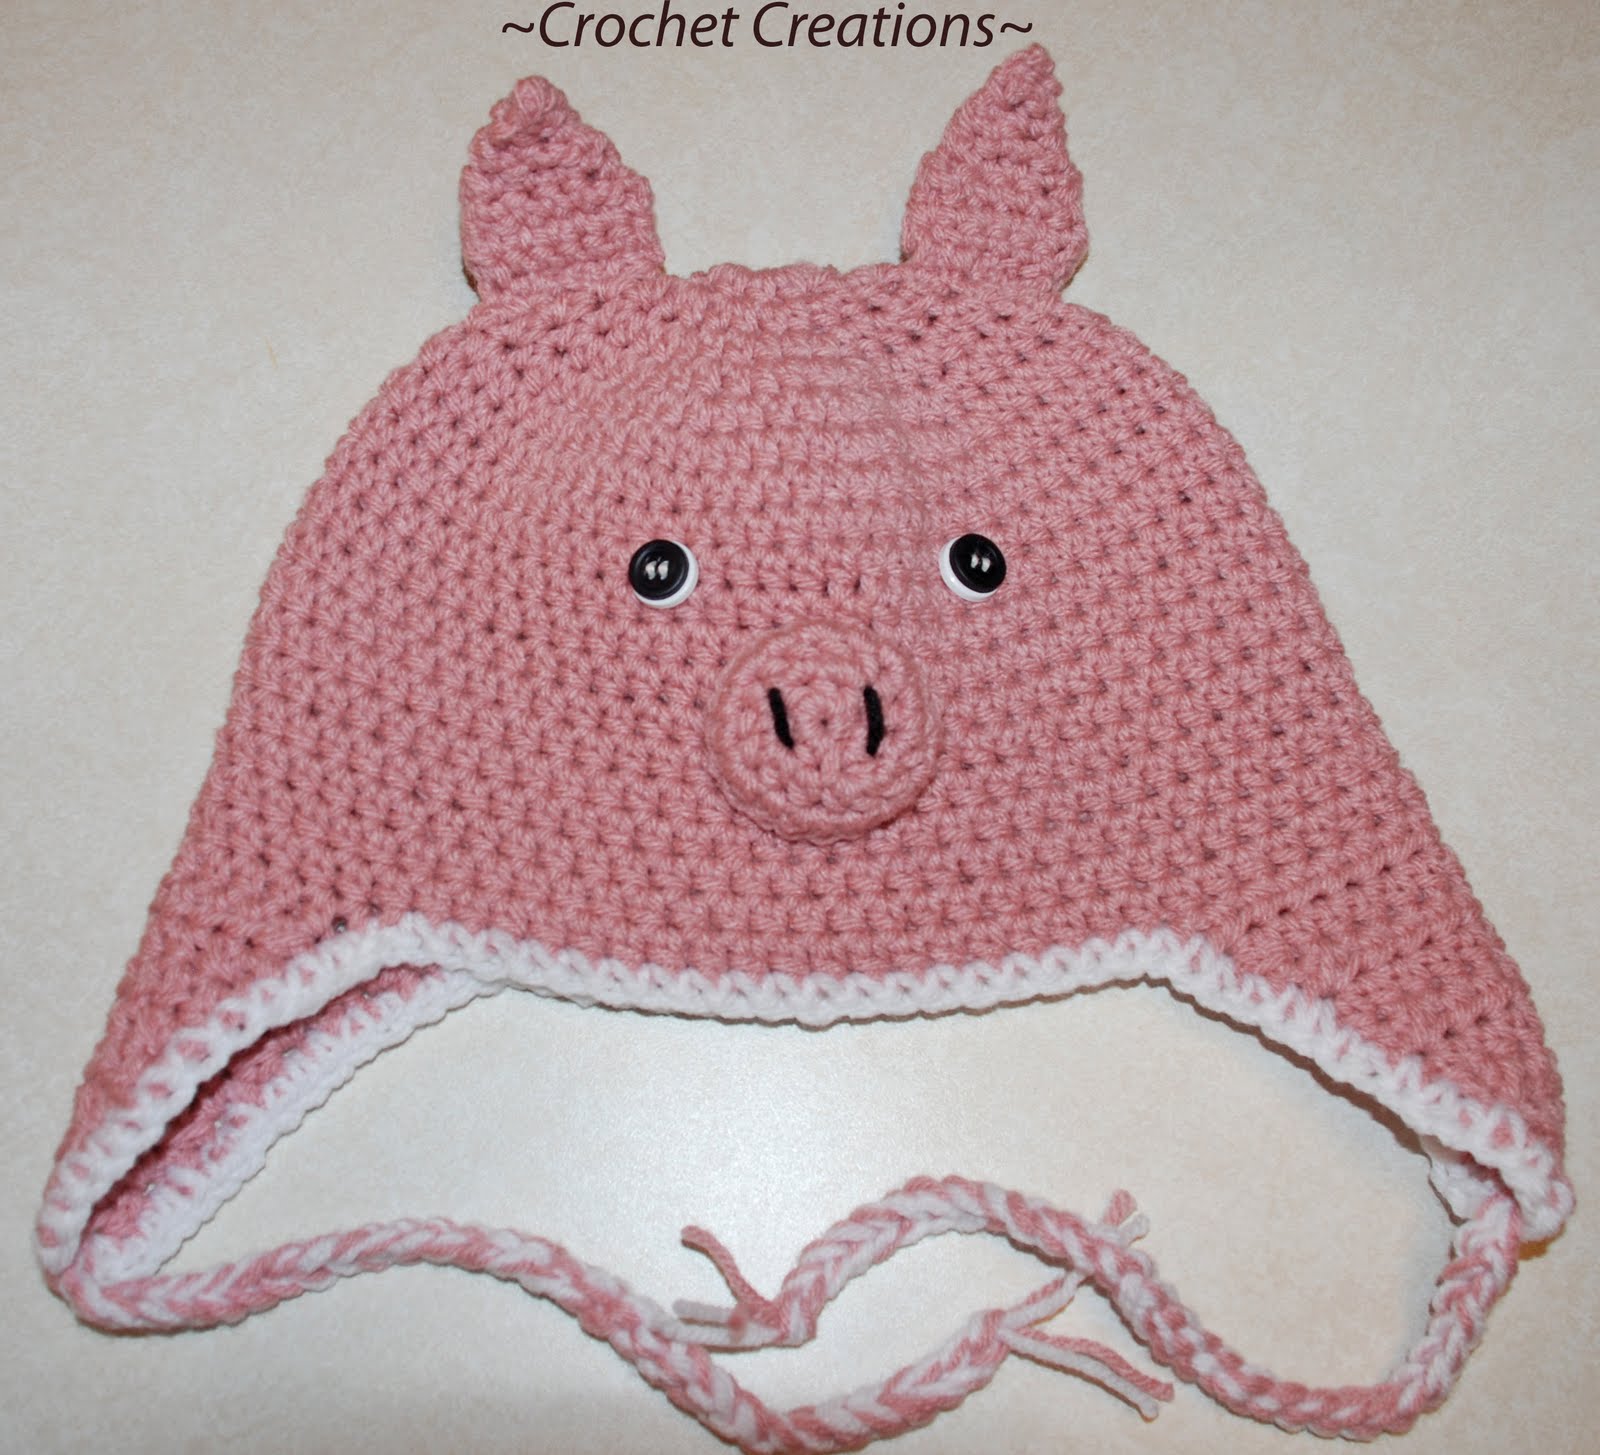 Free Crochet Pattern - Monkey Ear Flap Hat from the Baby hats and